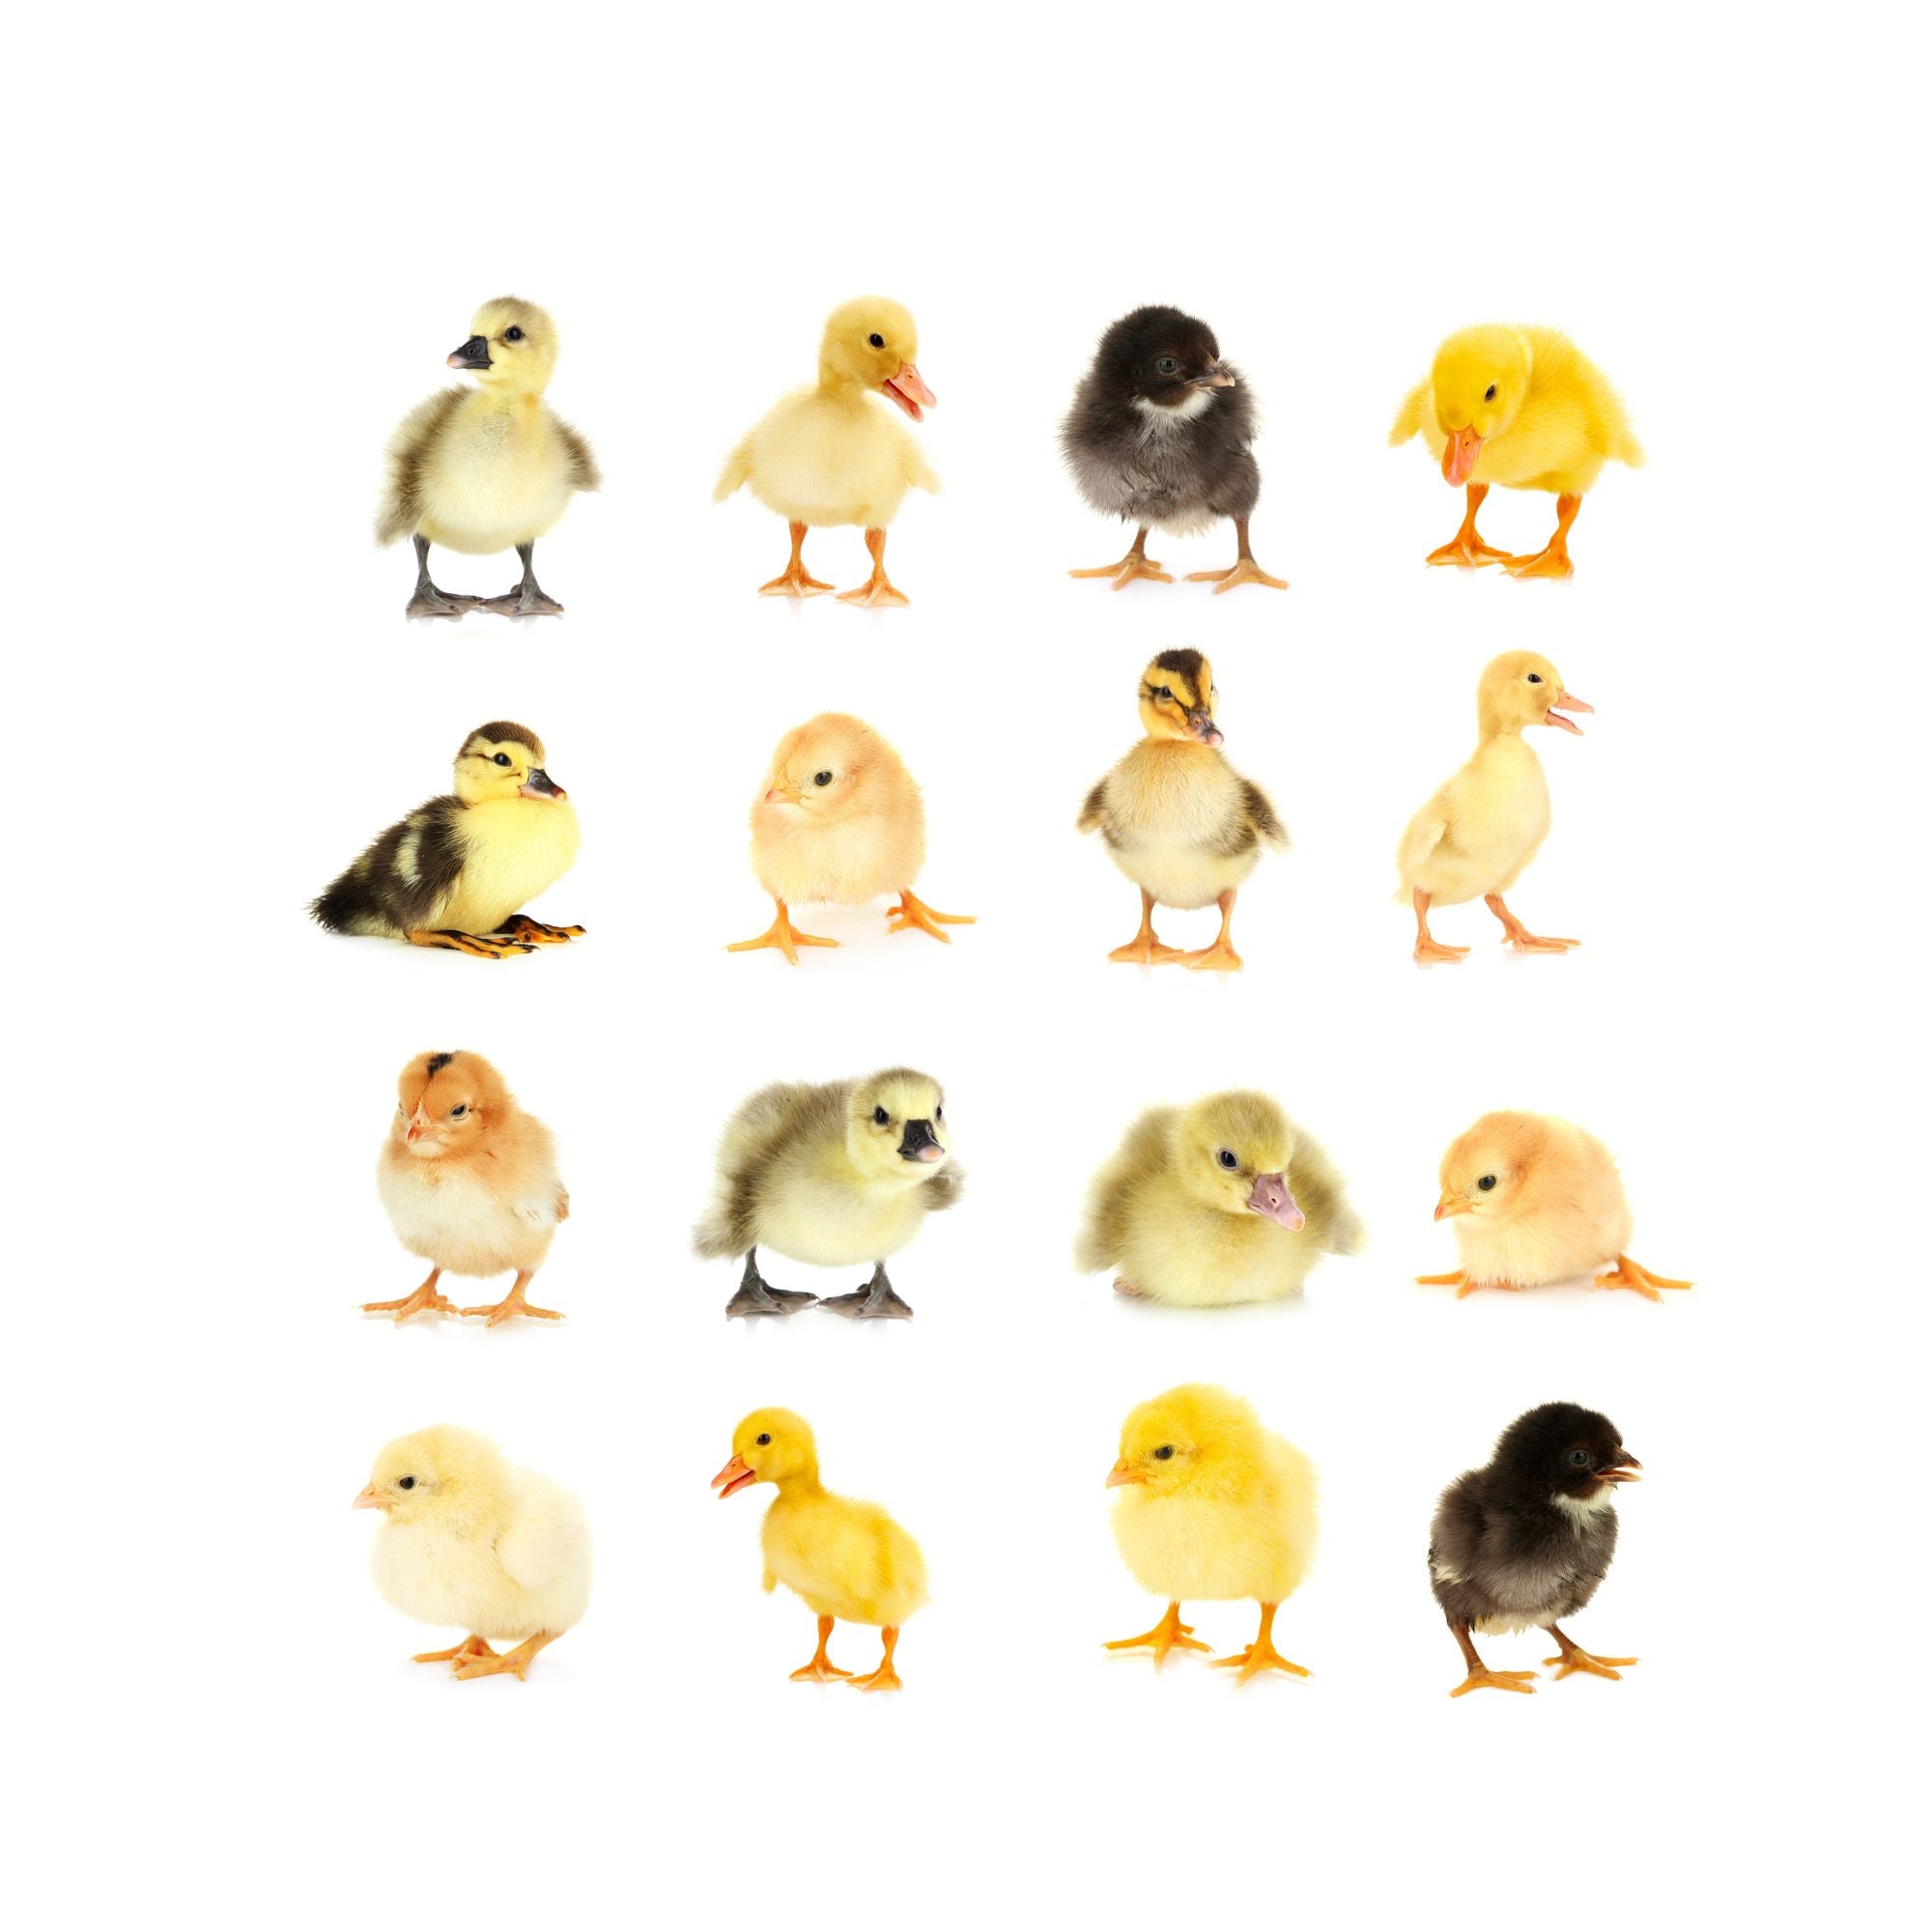 You can identify some baby chicks, ducks, and geese by the colored bands on their legs.